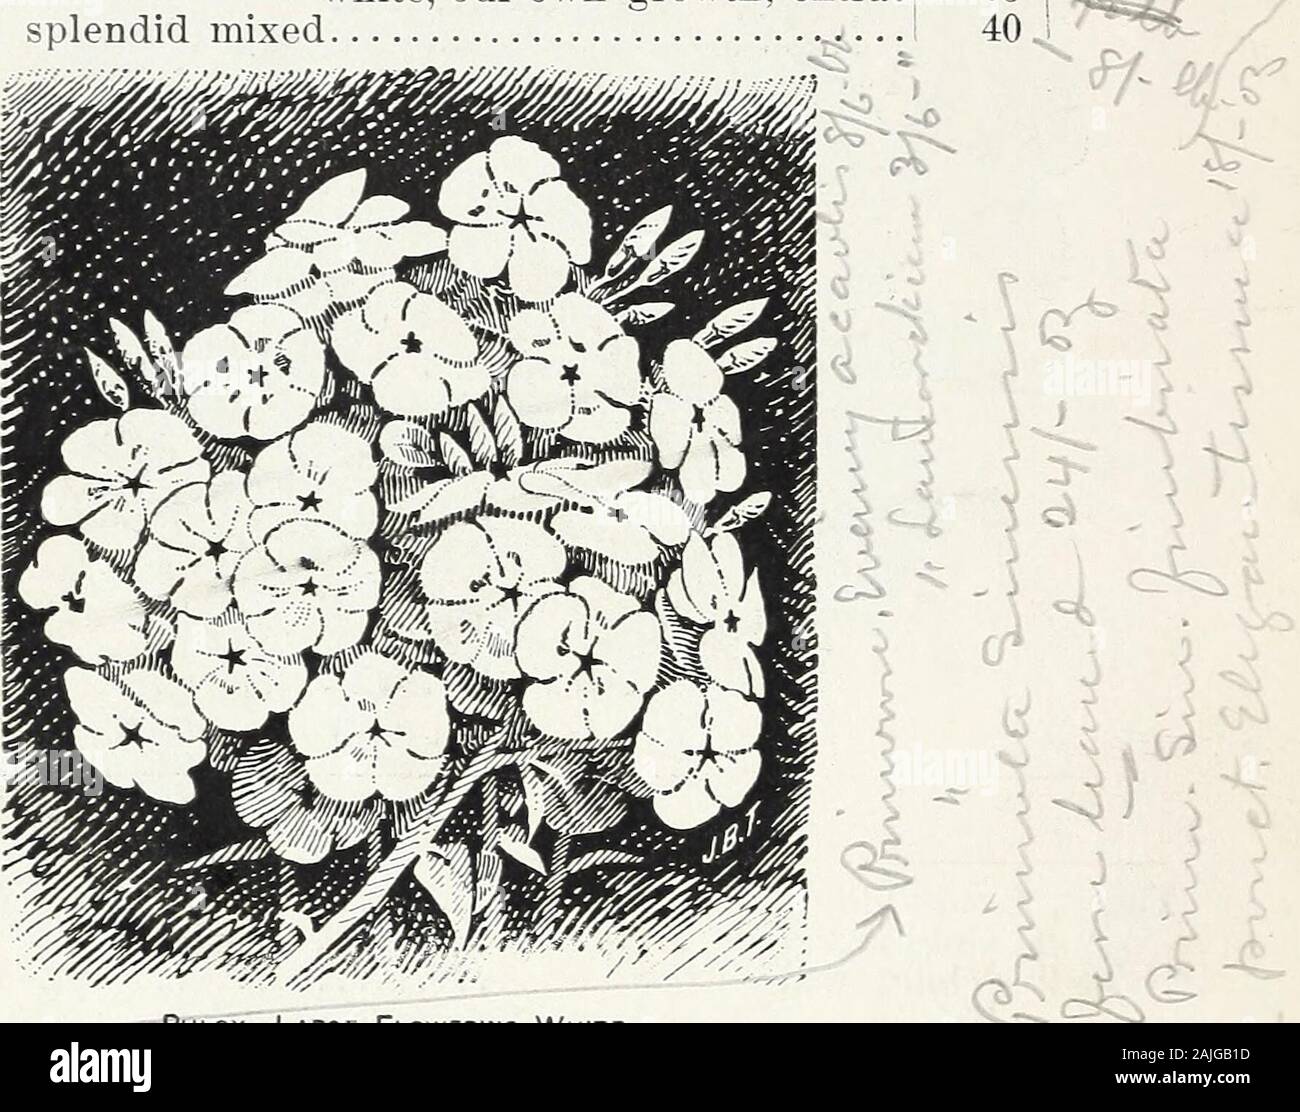 D M Ferry & Co.'s wholesale list of seeds for 1891 . FERRY & CO S WHOLESALE PRICE LIST. PER OZ. PER LB Petunia hybrida, striped and blotched, choice mixed (v./.t:. ? $® 75 $1 00.. fine mixed large flowered, choicest mixed, 1-16 oz.Phlox Drummondi, large flowered, extra choice mixed.. white, our own growth, extra,splendid mixed 4012 005 I. Phlox, Large Flowering White. Pink, China, double mixed, (Dianthus Chinensis) * Heddewigii, (Double Diadem) finest single mixed Poppy, Carnation, double white mixed.... Portulaca, single, large flowered pure white H yellow ? * striped caryophylloides, carnati Stock Photo